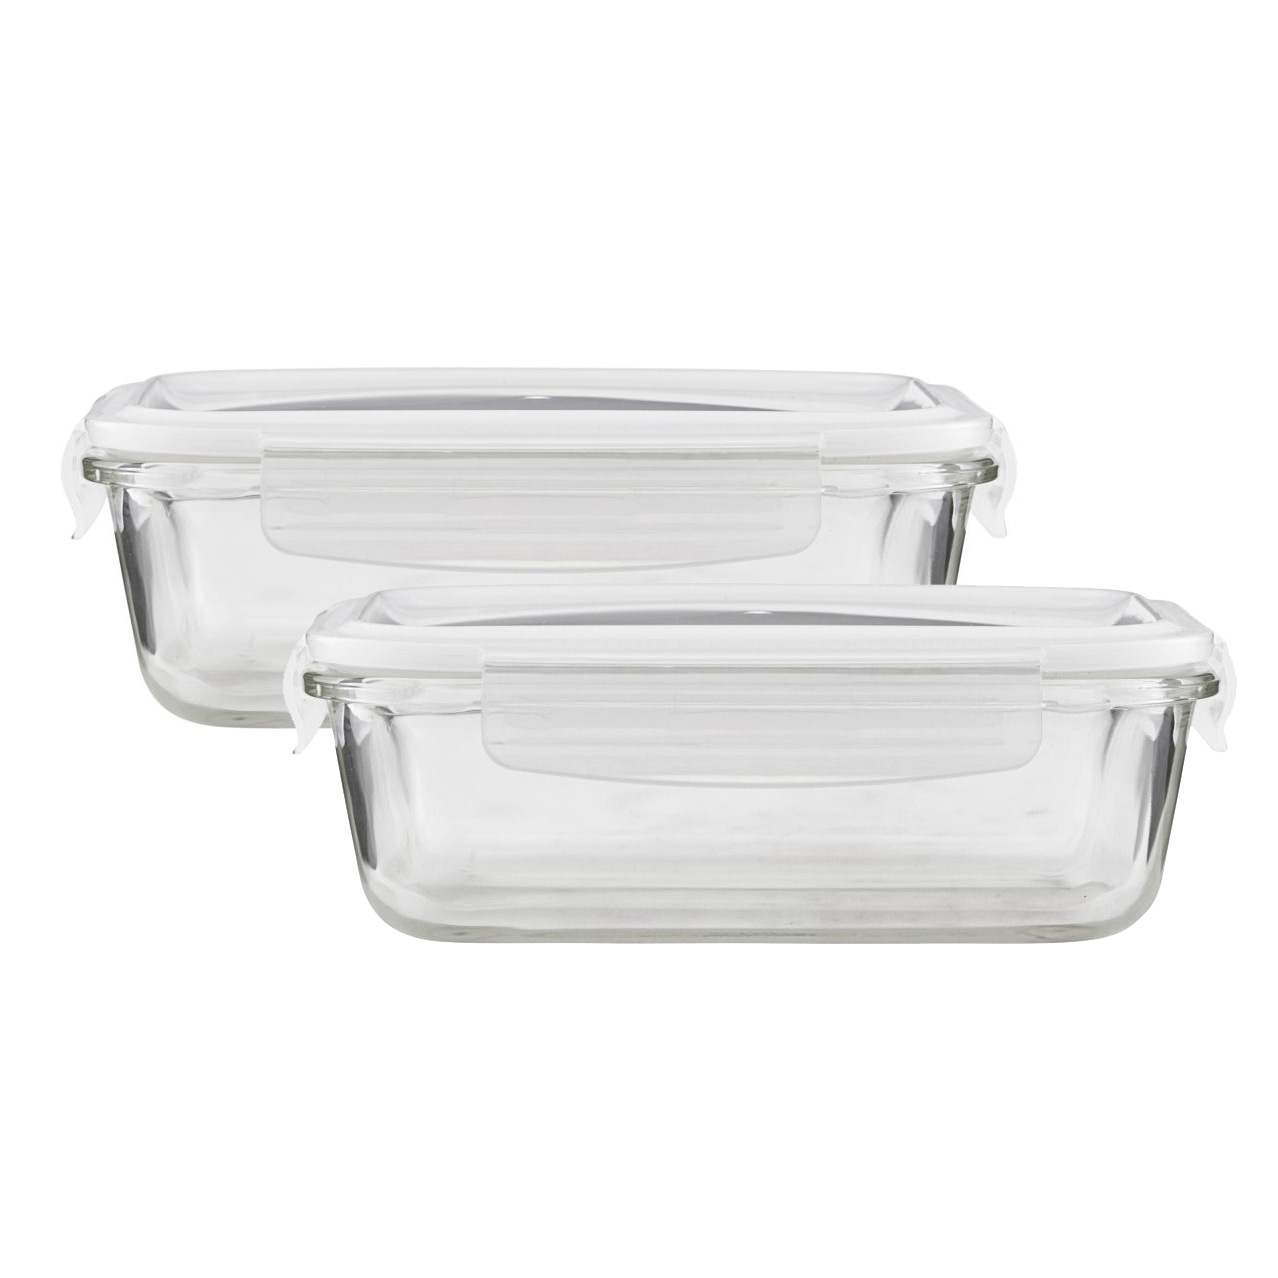 https://www.nordicnest.com/assets/blobs/house-doctor-glass-lunch-box-2-pack-clear-glass/42330-01-01_01-4bad336314.jpg